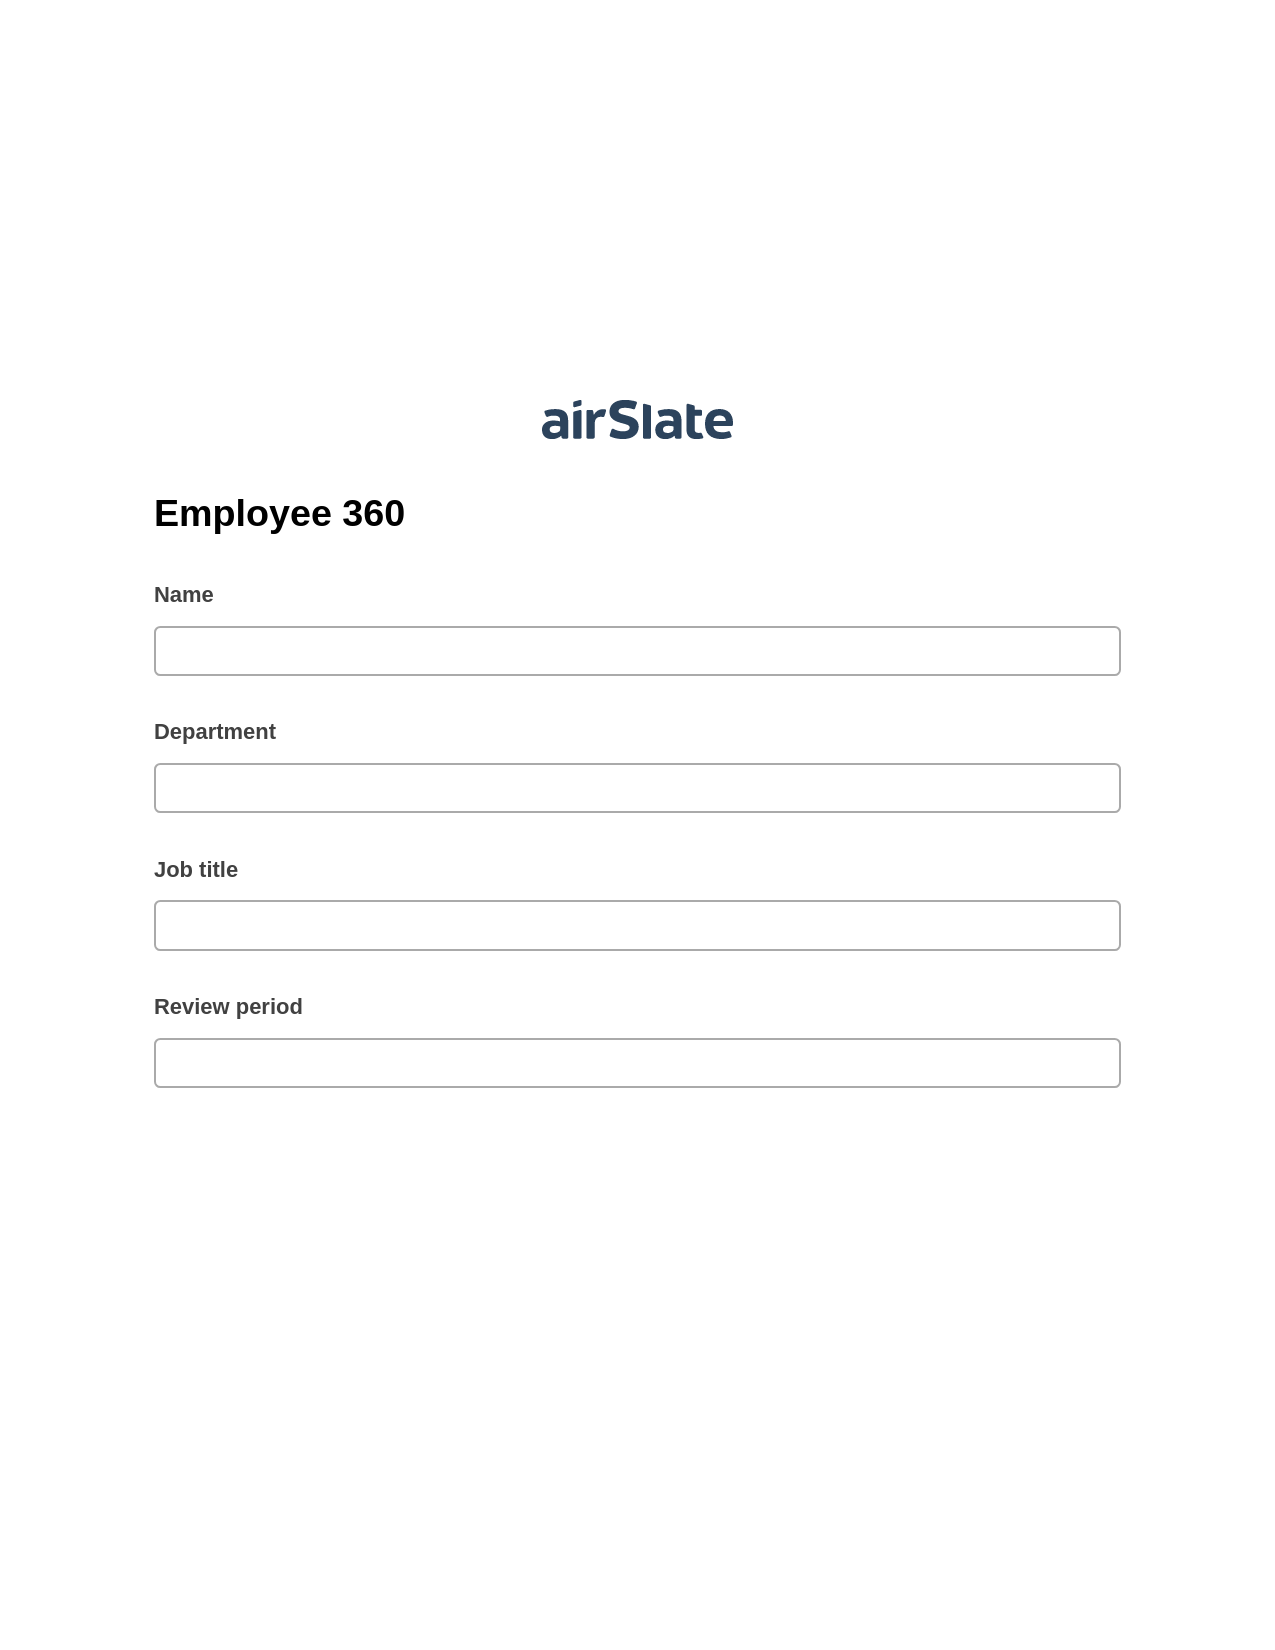 Employee 360 Pre-fill from AirTable Bot, Update MS Dynamics 365 Record Bot, Archive to Google Drive Bot